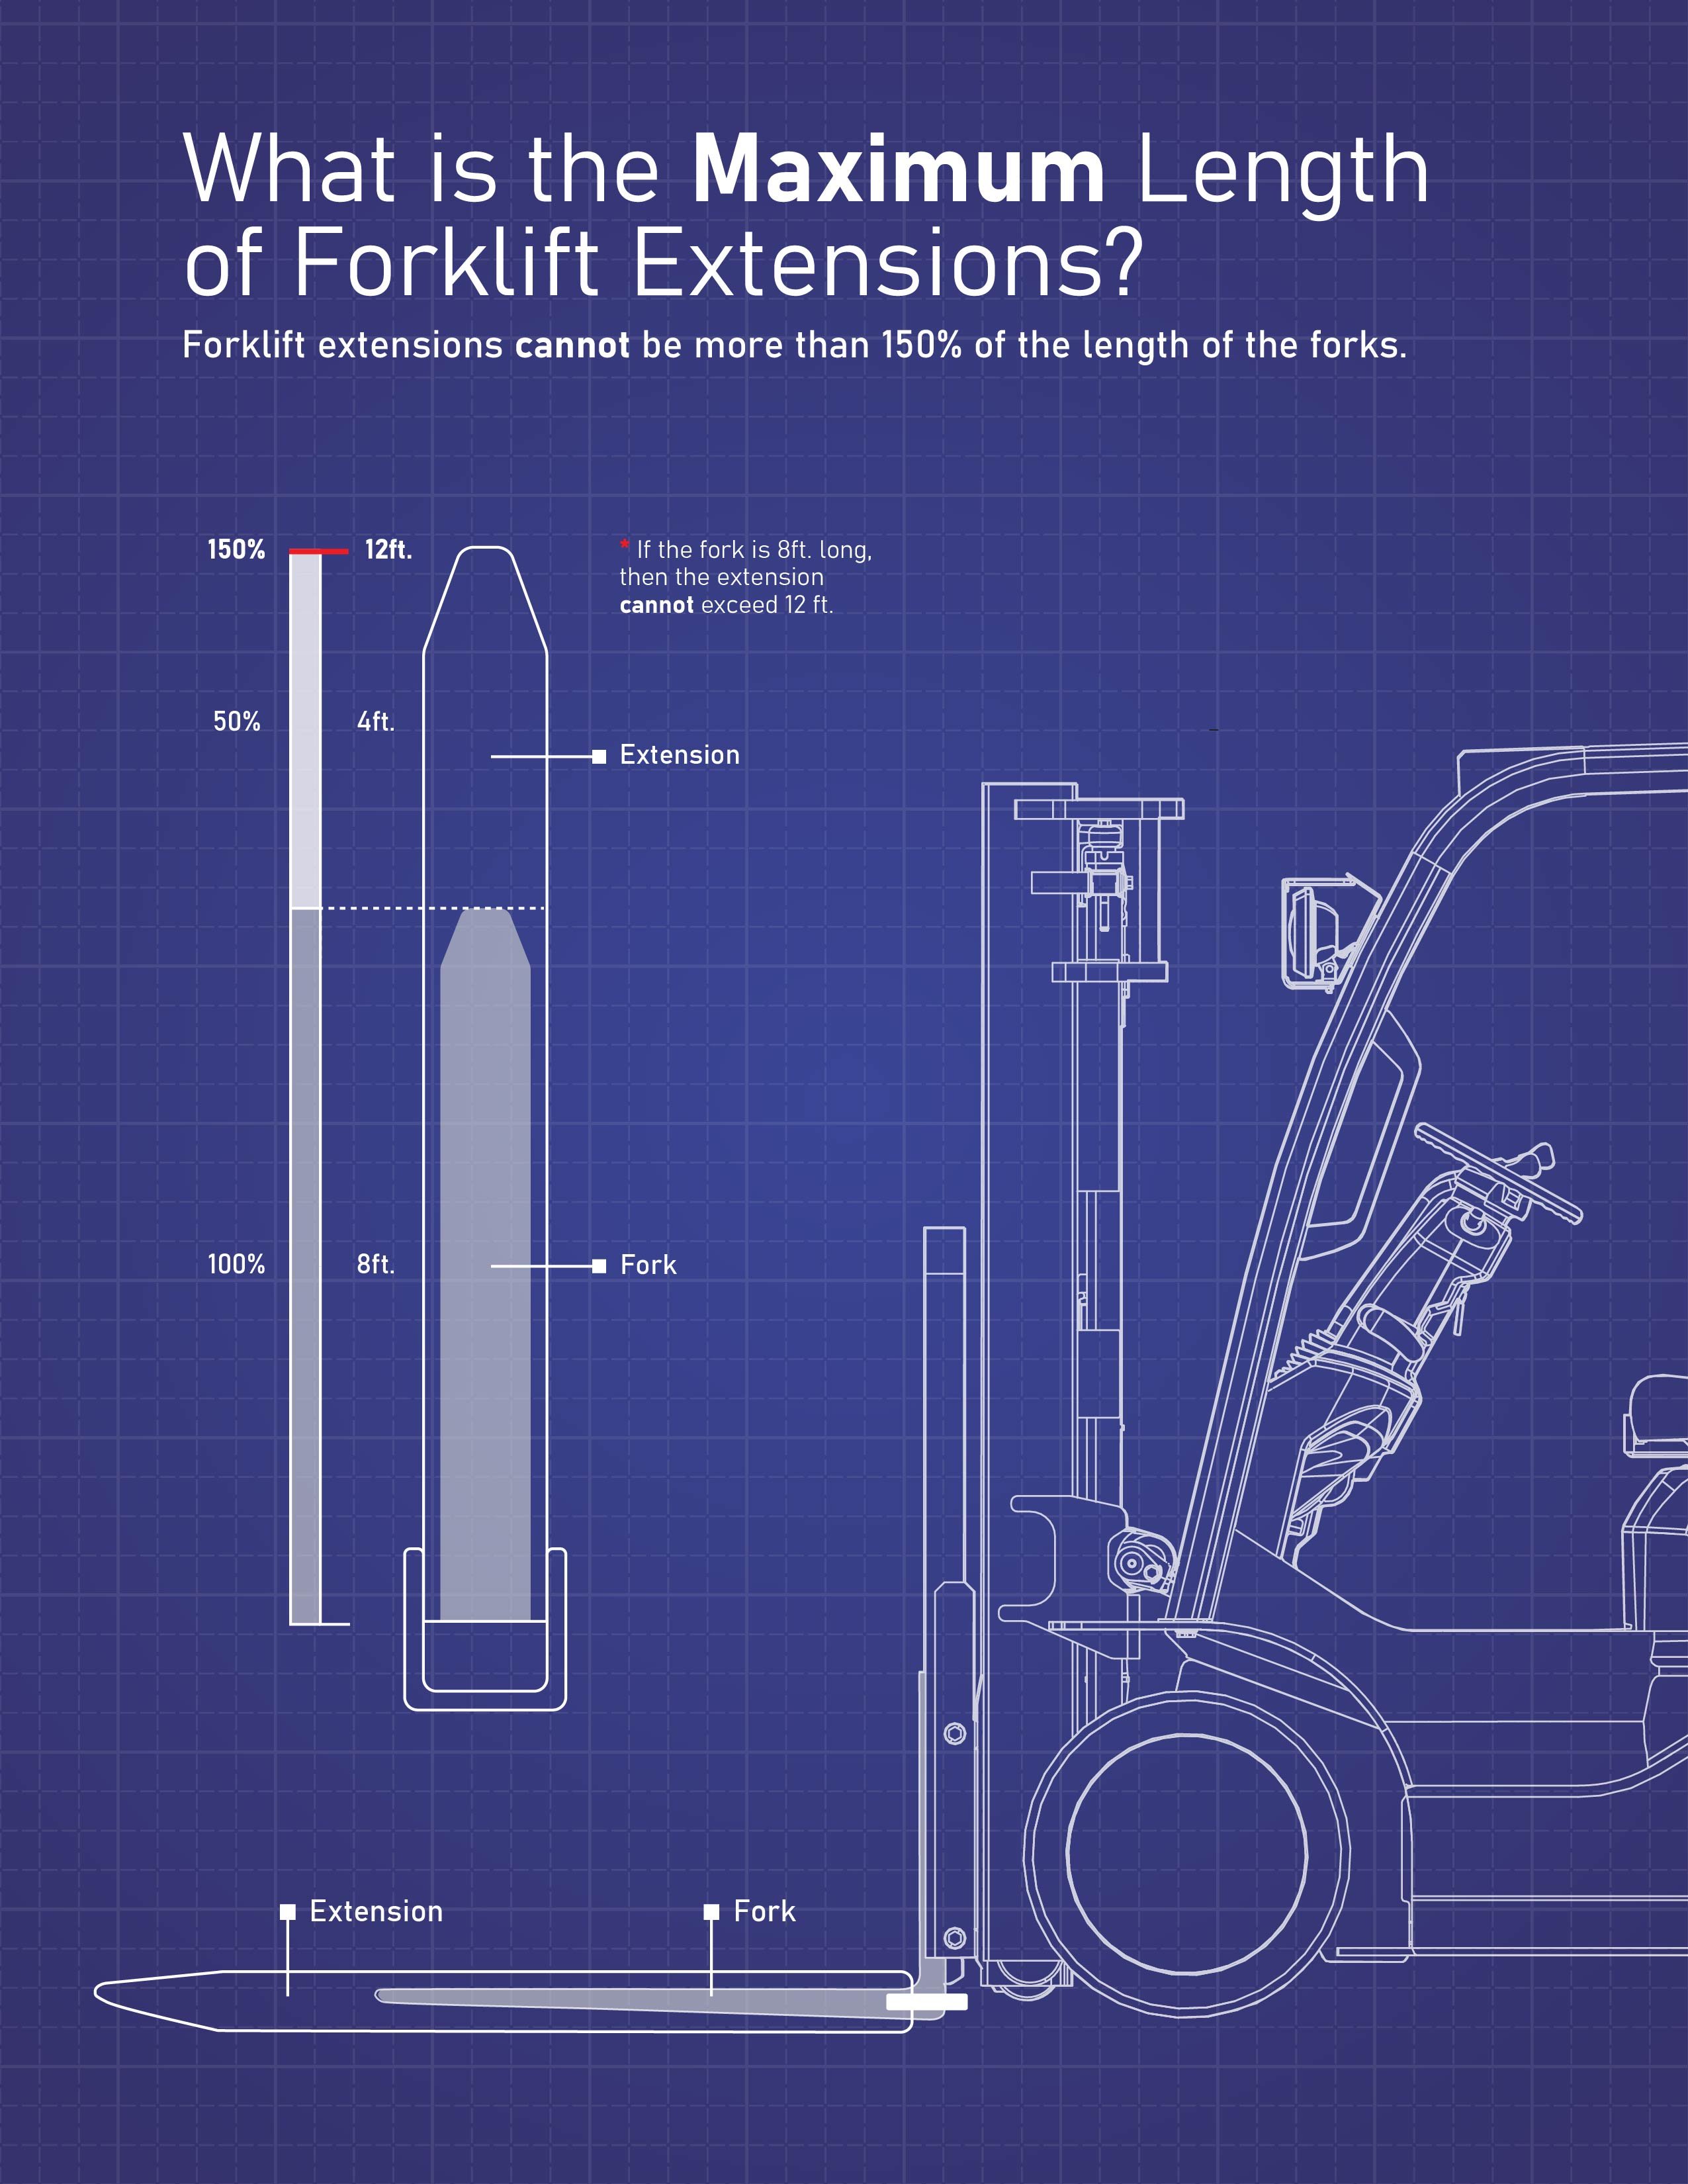 What is the maximum length of Forklift Extensions?